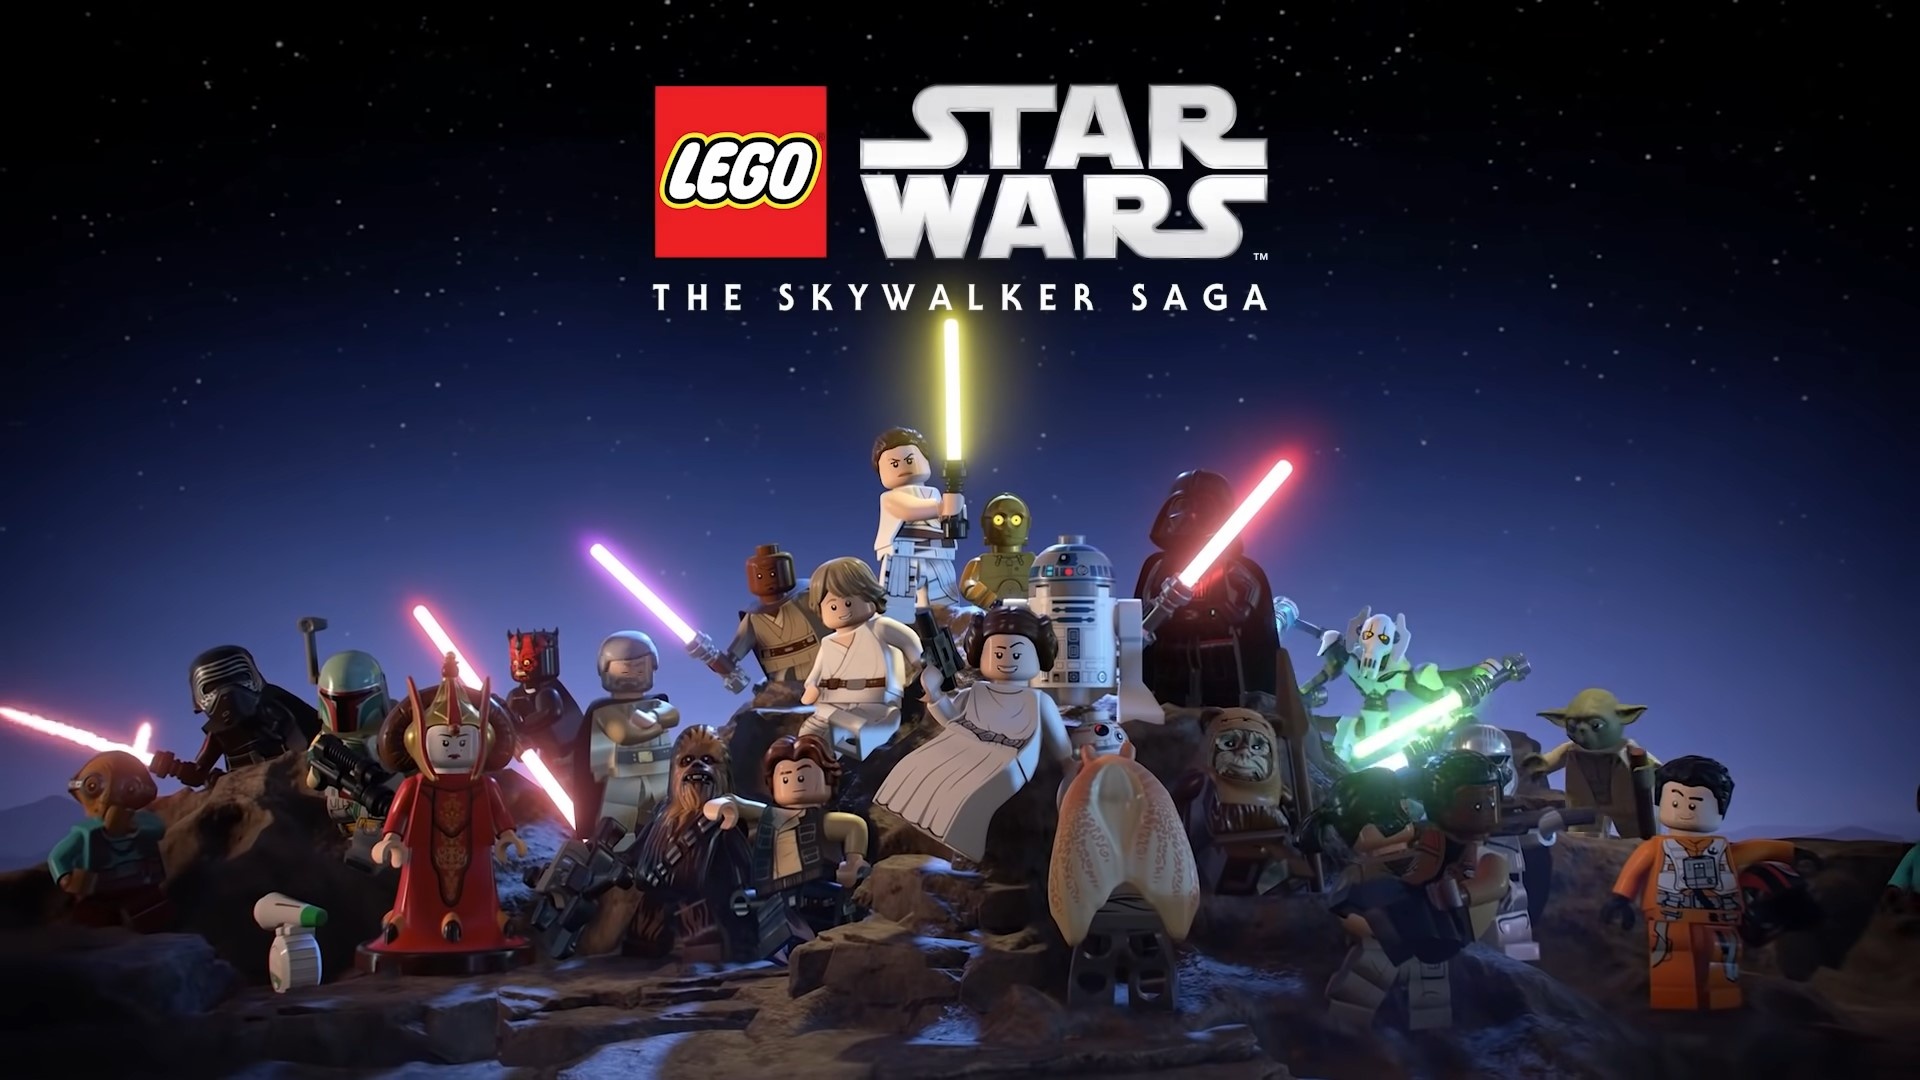 LEGO Star Wars game, Release date announcement, PSP wallpaper collection, Portable gaming, 1920x1080 Full HD Desktop